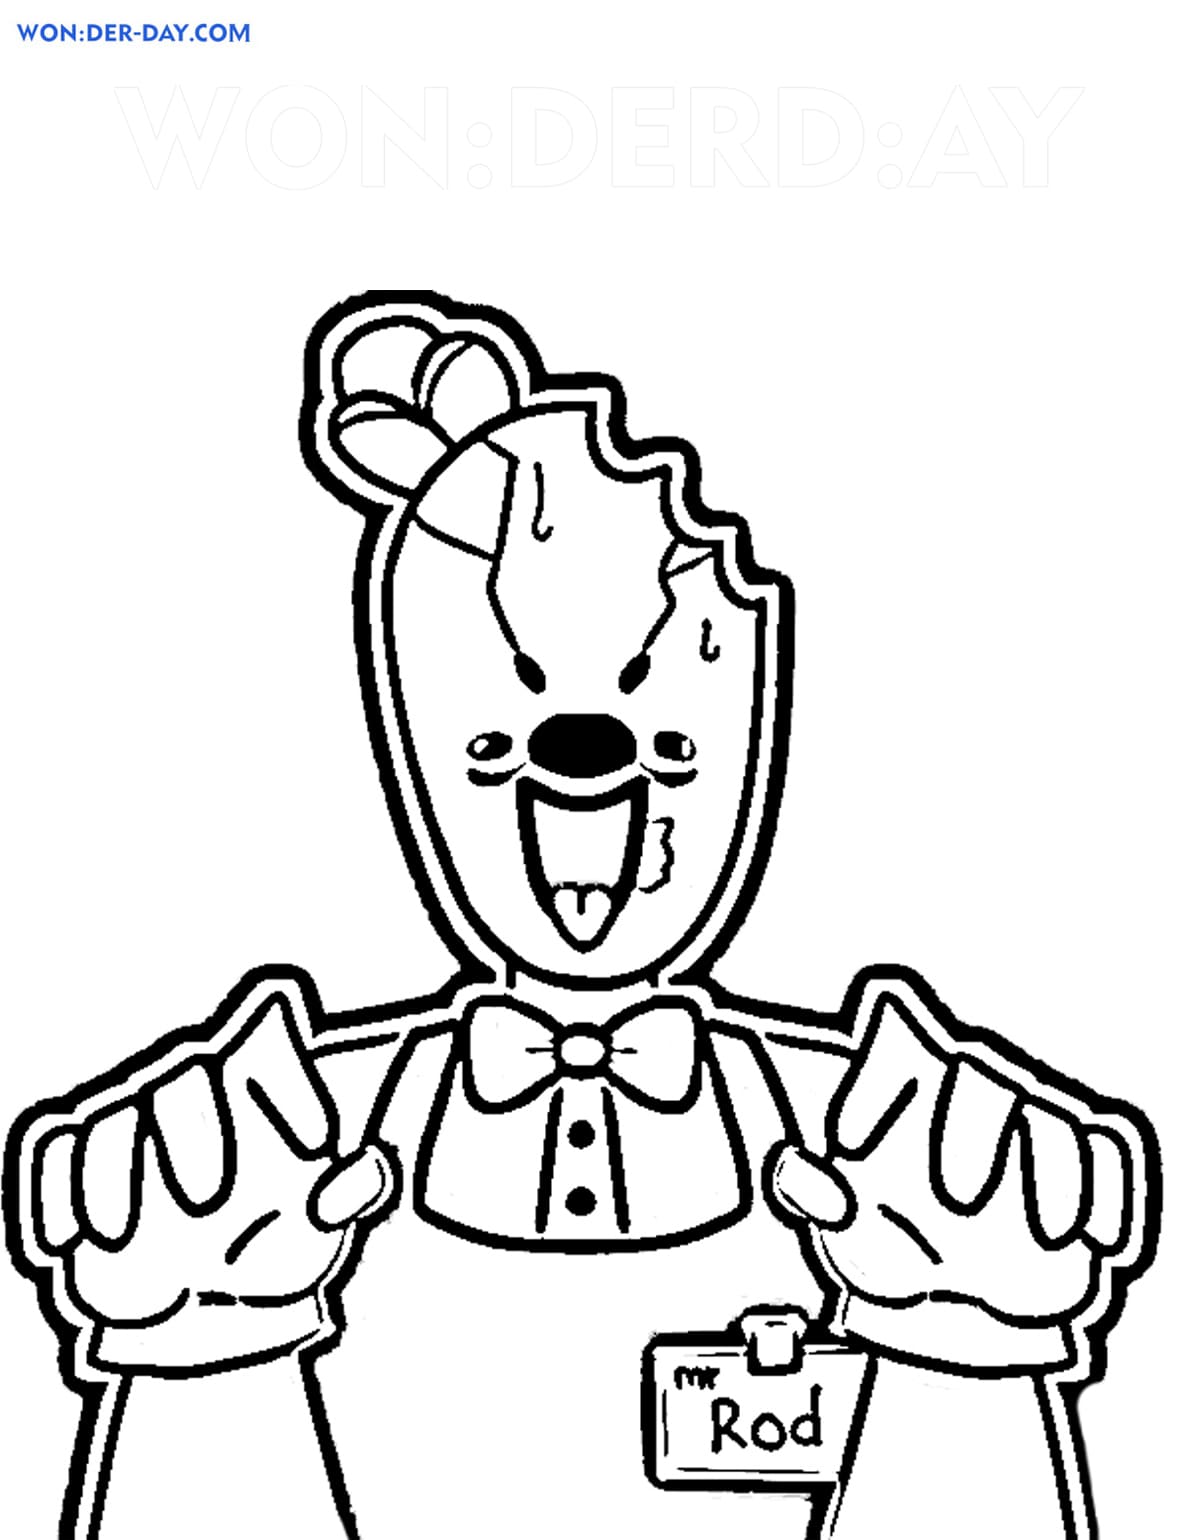 Rod Ice Scream coloring pages - Free Printable coloring pages